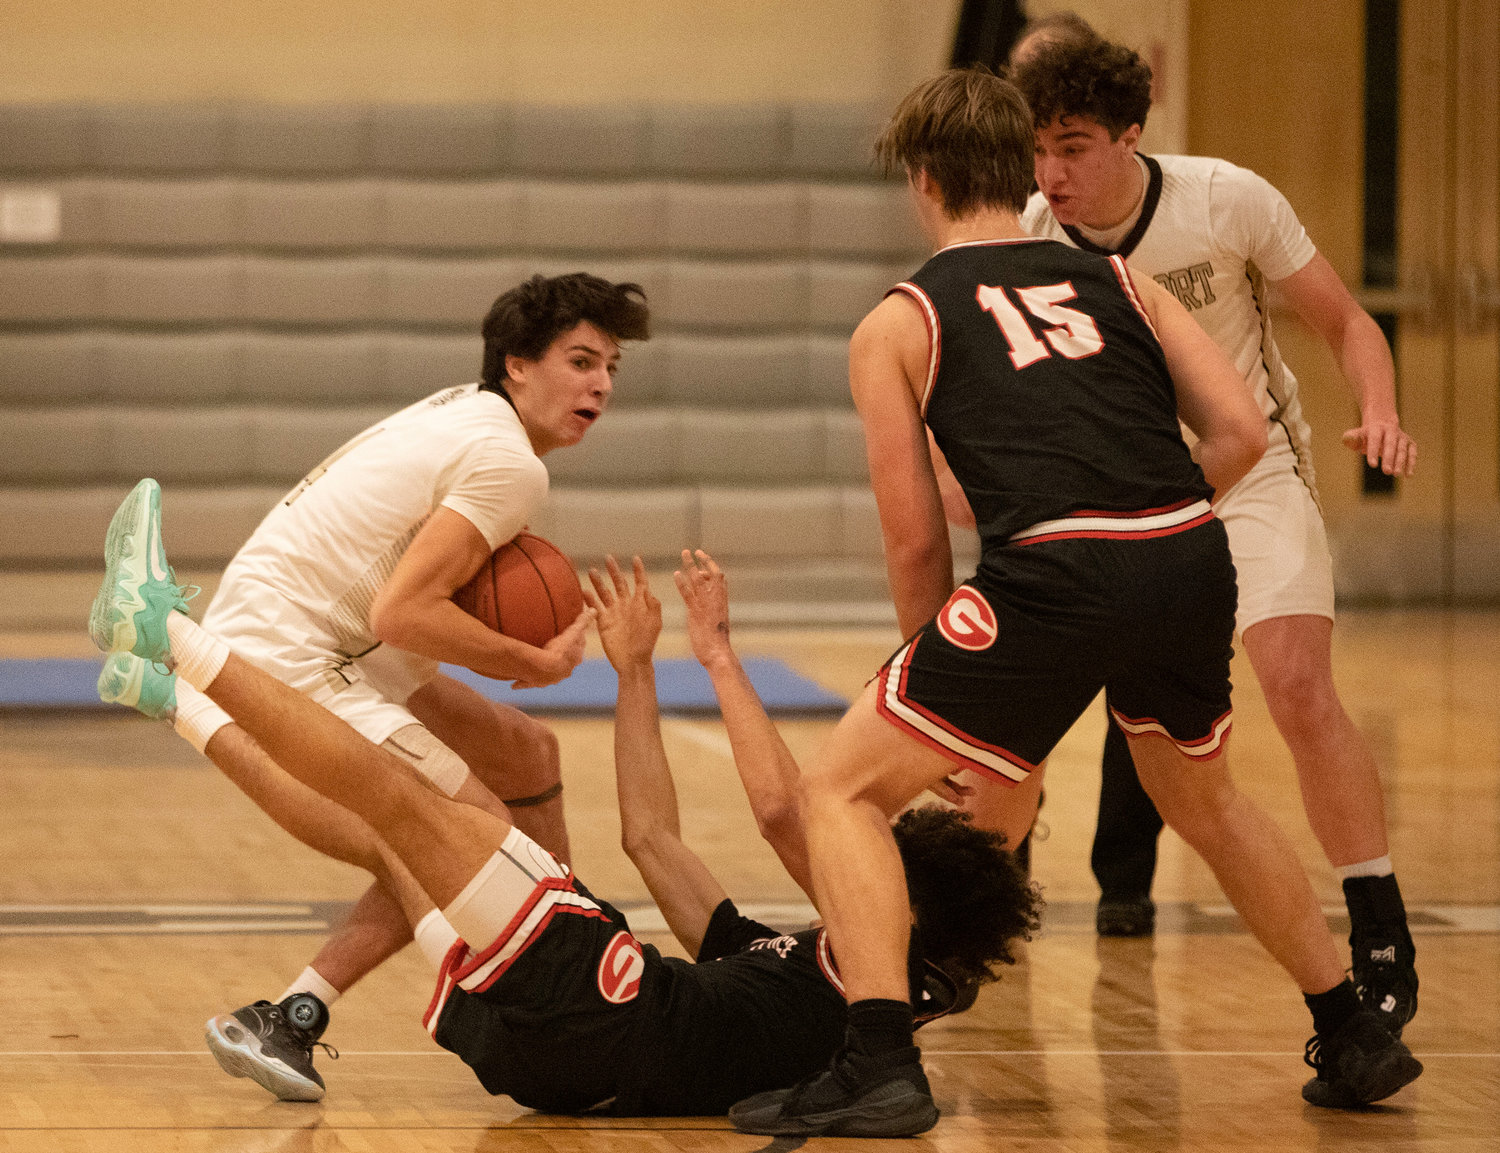 Owen Boudria makes rips the ball out of the hands of Greylock guard Noah Kane-Smalls as teammate Max Morotti looks on.